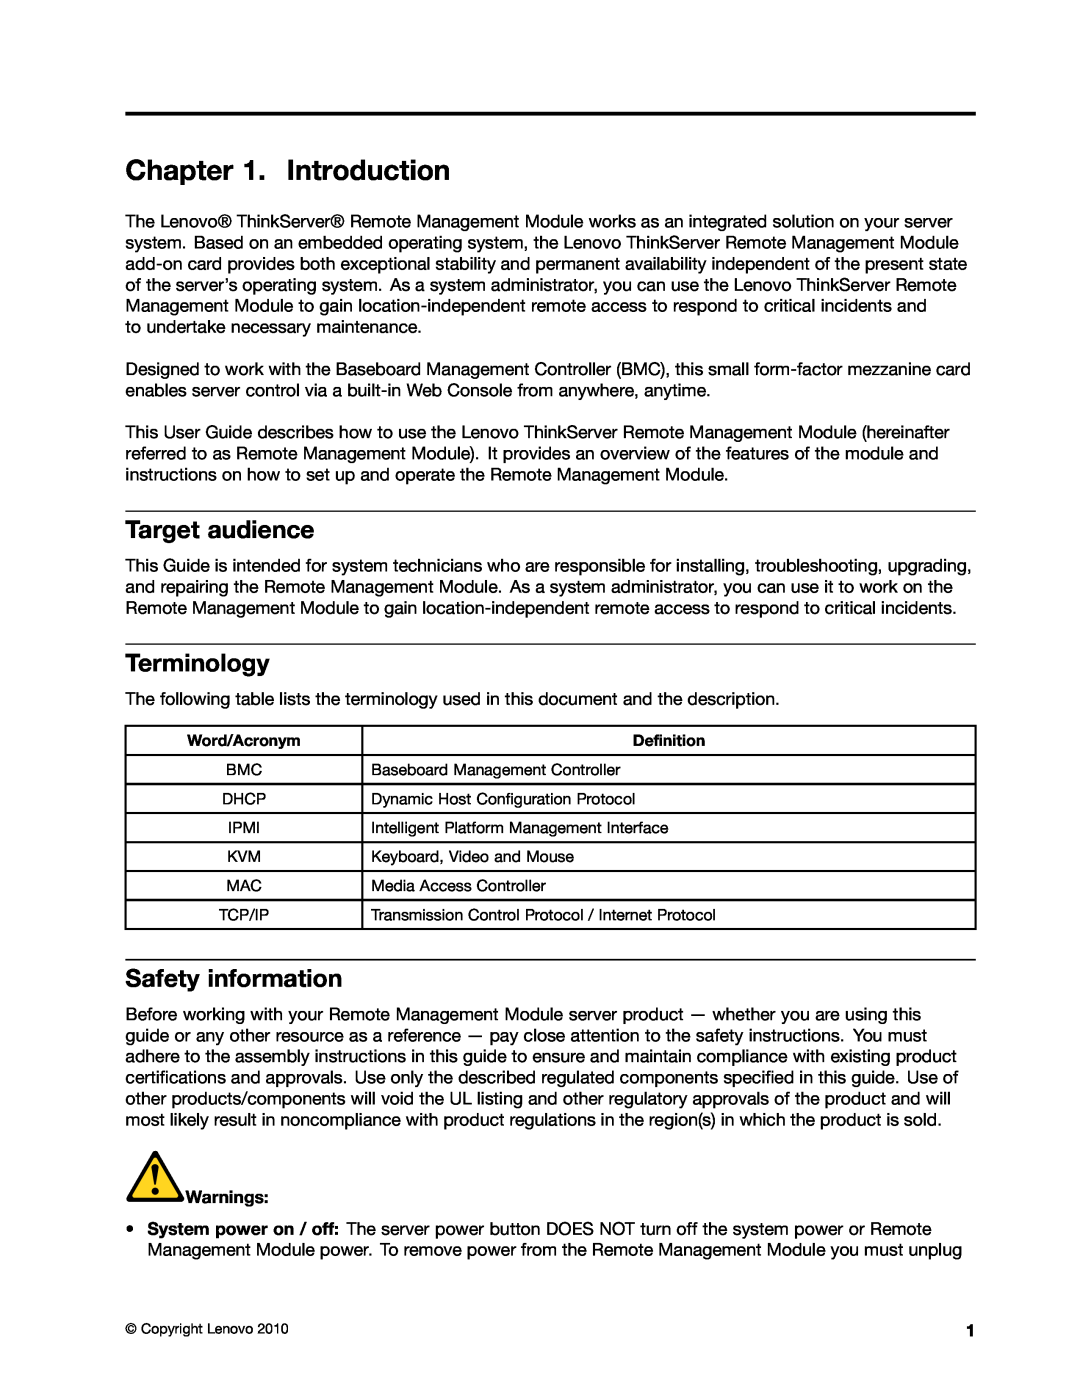 Lenovo TD230 manual Introduction, Target audience, Terminology, Safety information, Warnings 